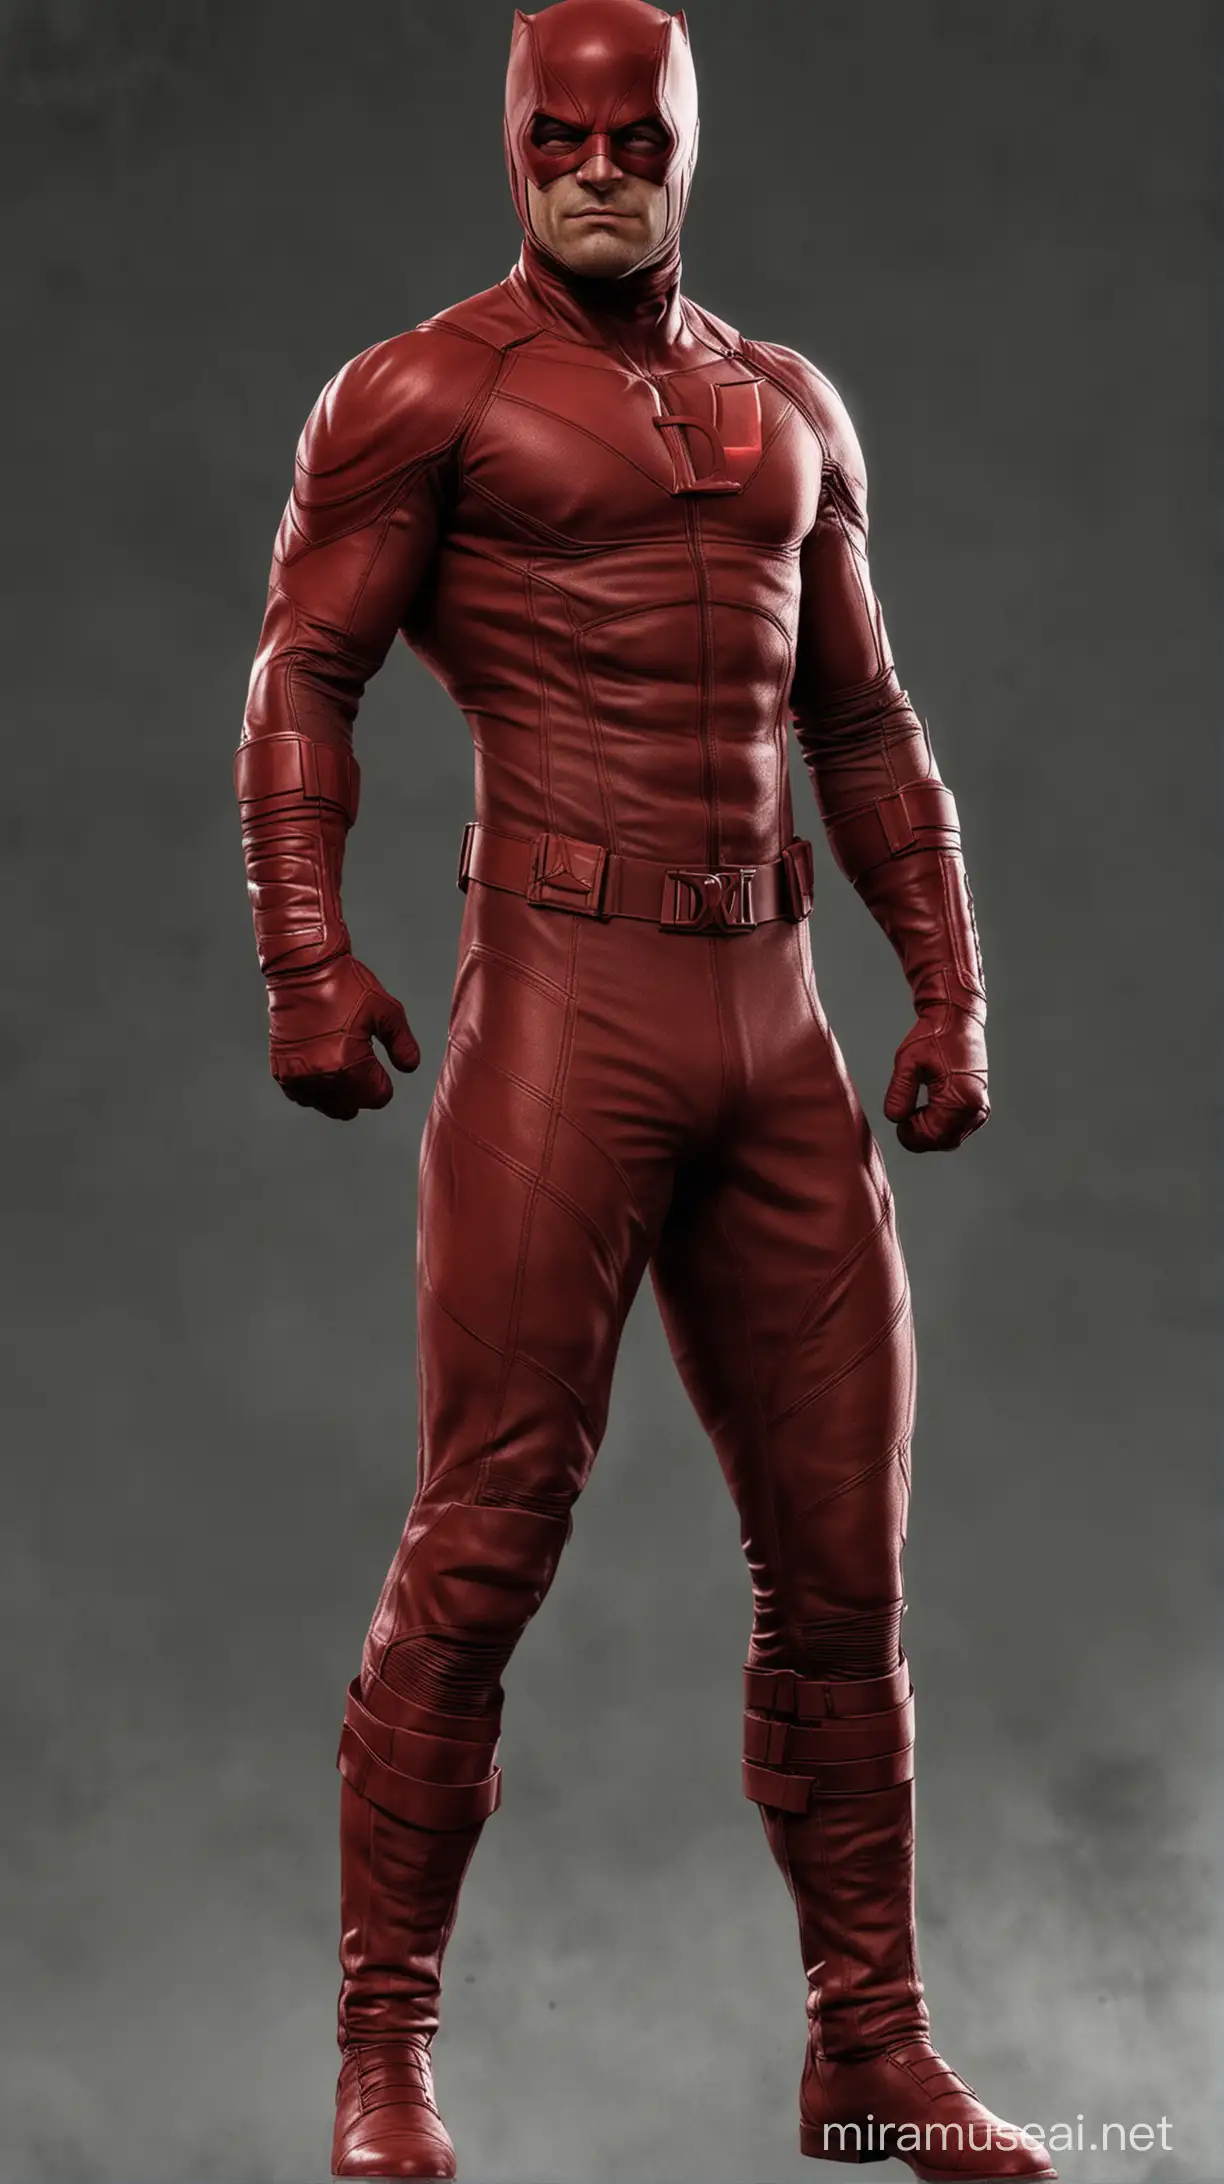 FullBody Daredevil Character in Dynamic Action Pose